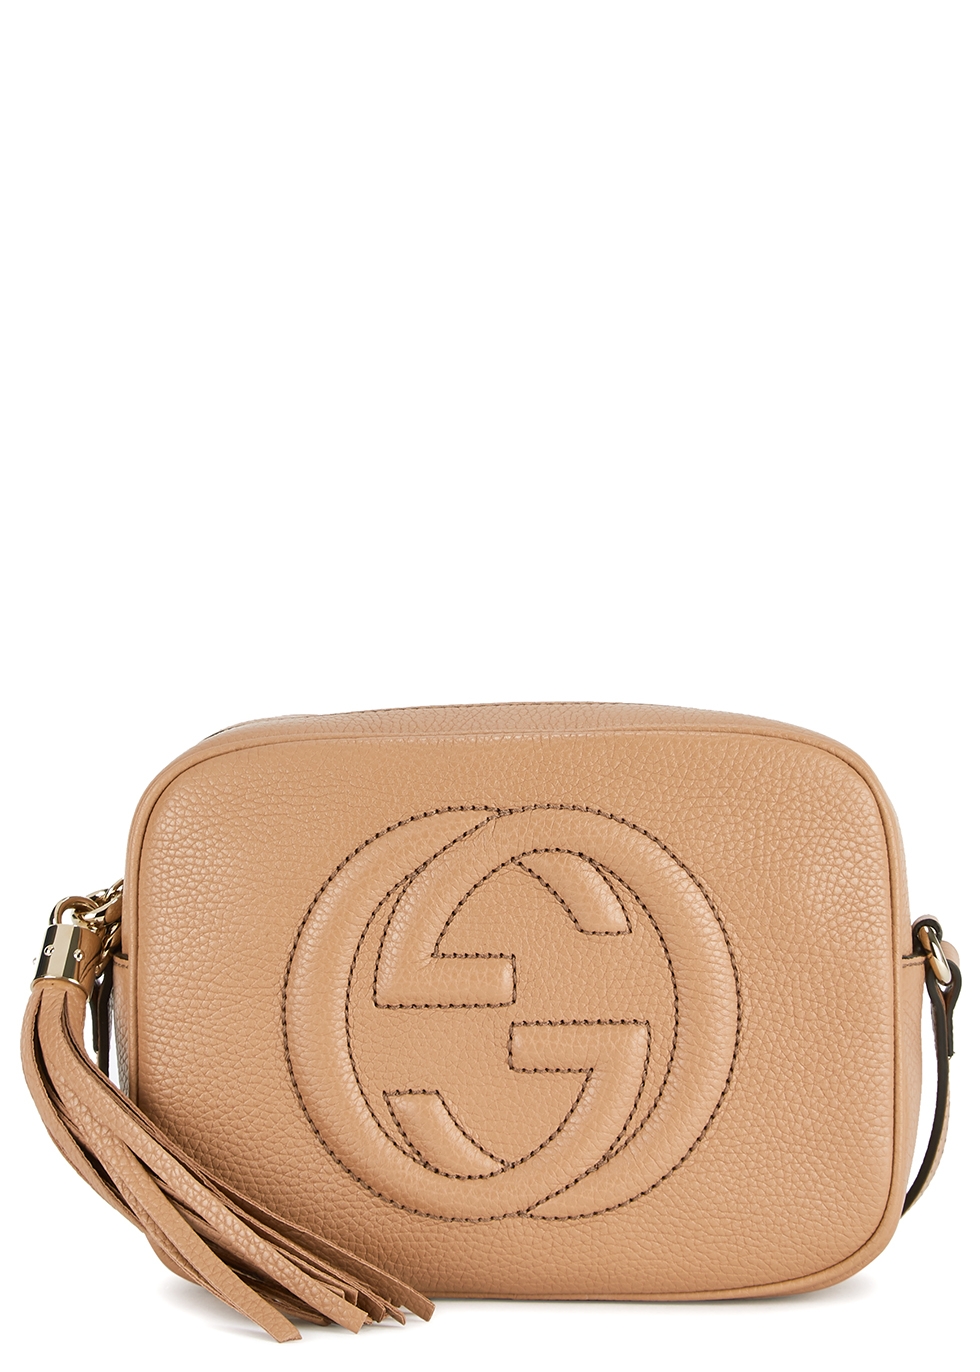 gucci soho small leather